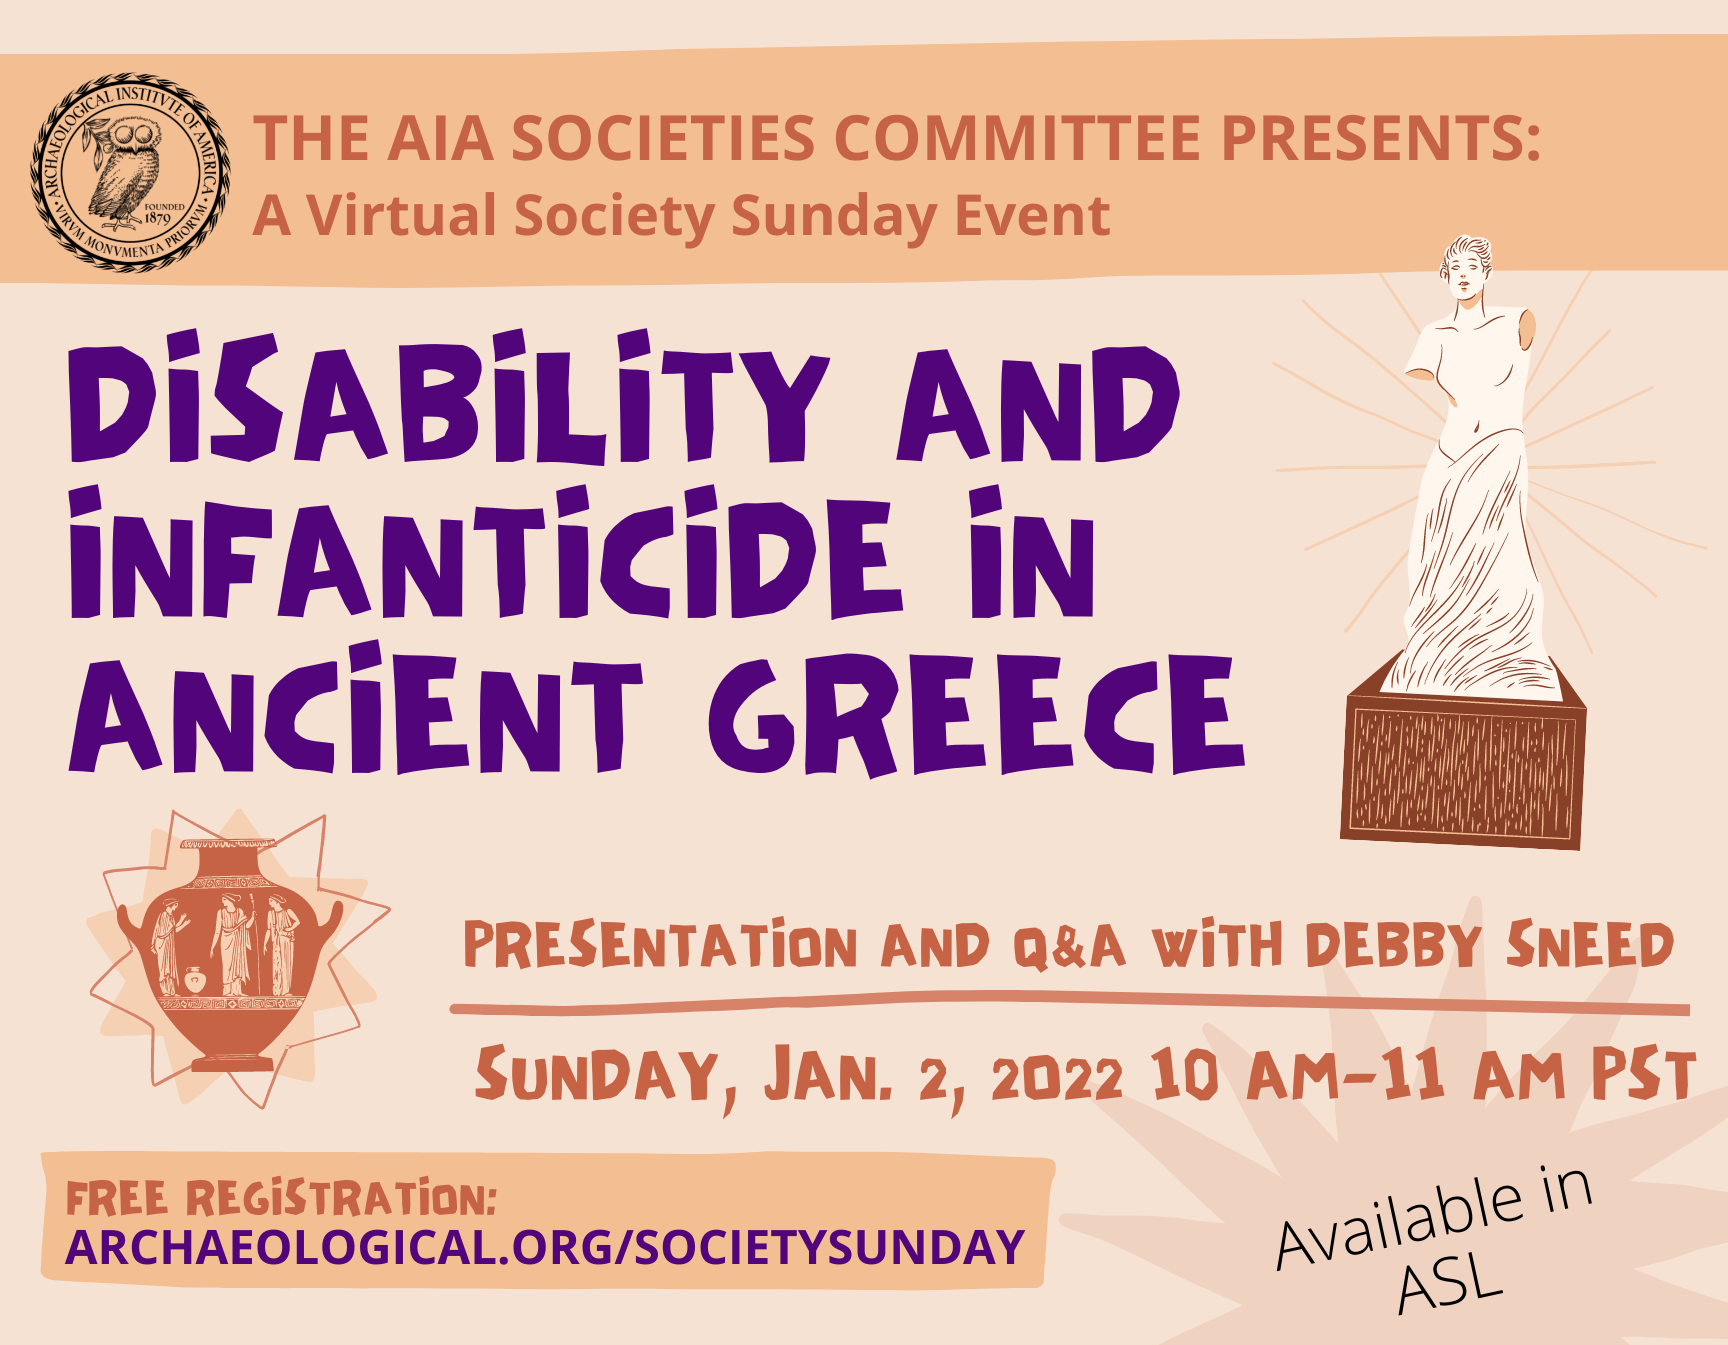 The AIA Societies Committee Presents: A Virtual Society Sunday Event. “Disability and Infanticide in Ancient Greece,” a presentation and Q&A with Debby Sneed on Sunday, Jan. 2, 2022 from 10am – 11am PST. Available in ASL. Visit archaeological.org/societysunday for free registration. Poster is shades of orange with cartoon decorative images of a marble statue of a female goddess and a red-figure vase.